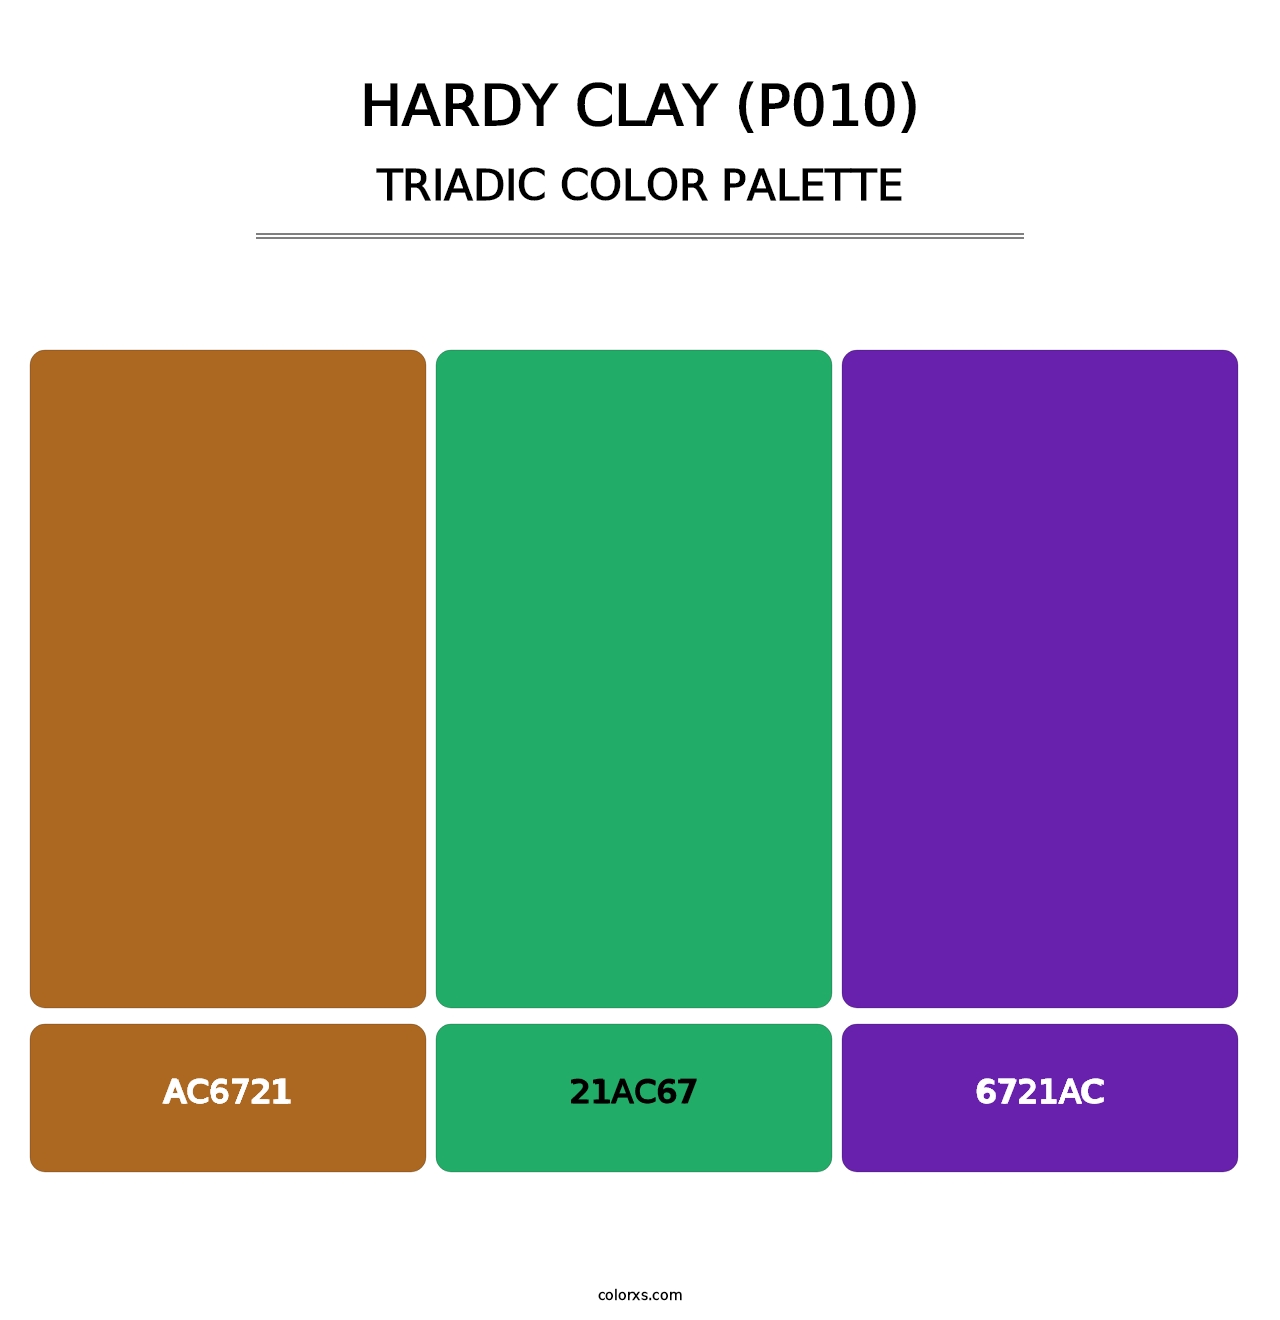 Hardy Clay (P010) - Triadic Color Palette